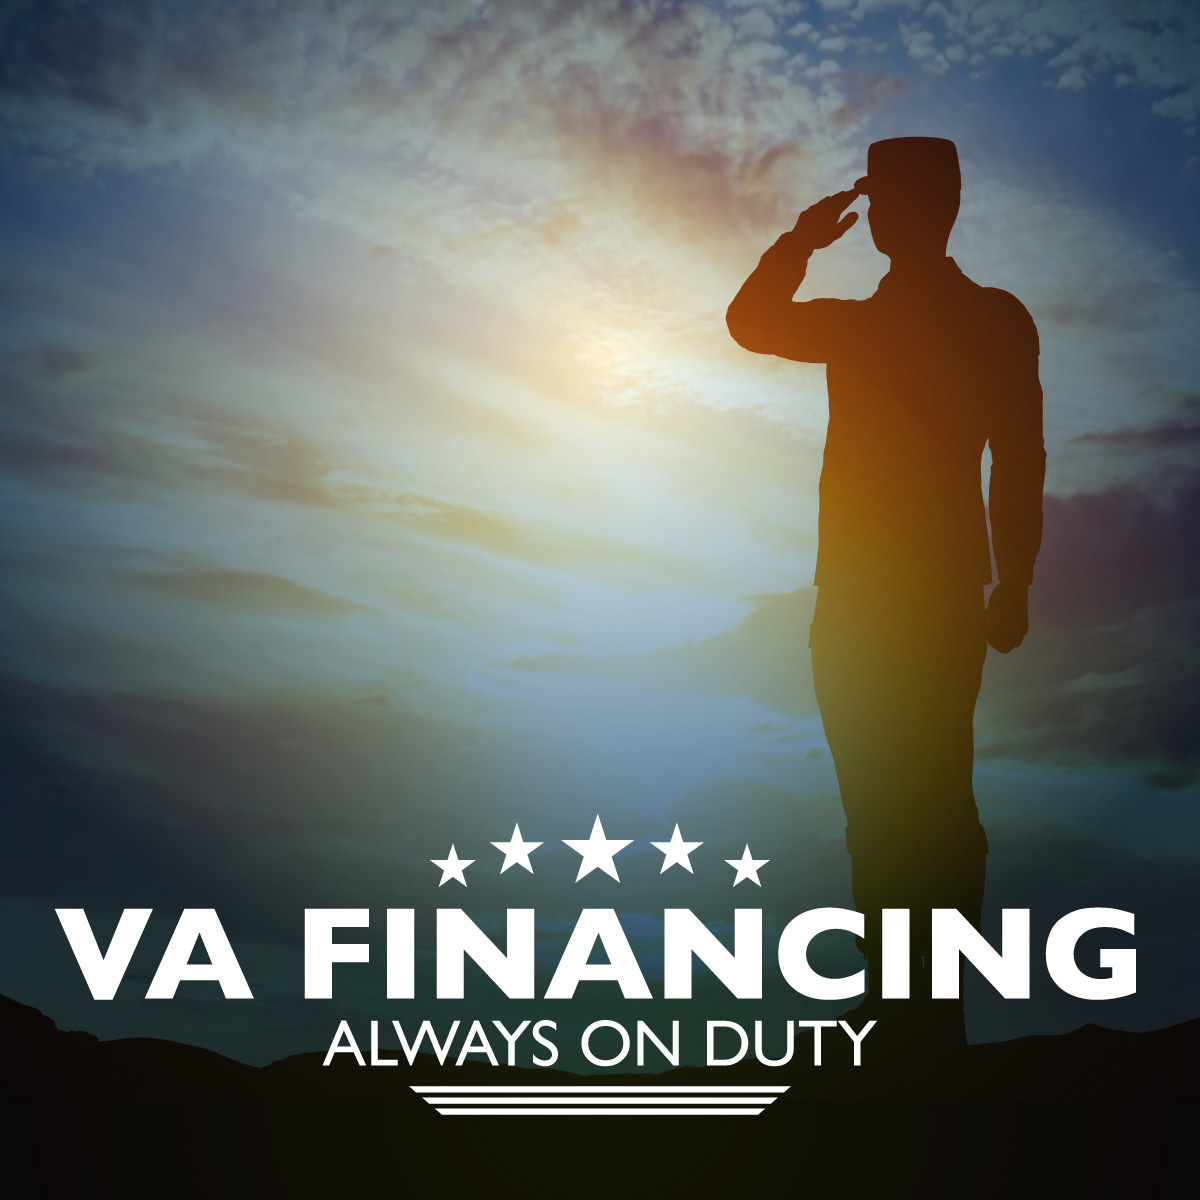 🎗️🏡 Attention all veterans! In honor of your incredible service, I'm thrilled to extend a heartfelt gesture of gratitude. Whether you're in search of a new home or refinancing. Let's connect today and explore the possibilities together. 🤝🏼🇺🇸 #VeteransSupportingVeterans